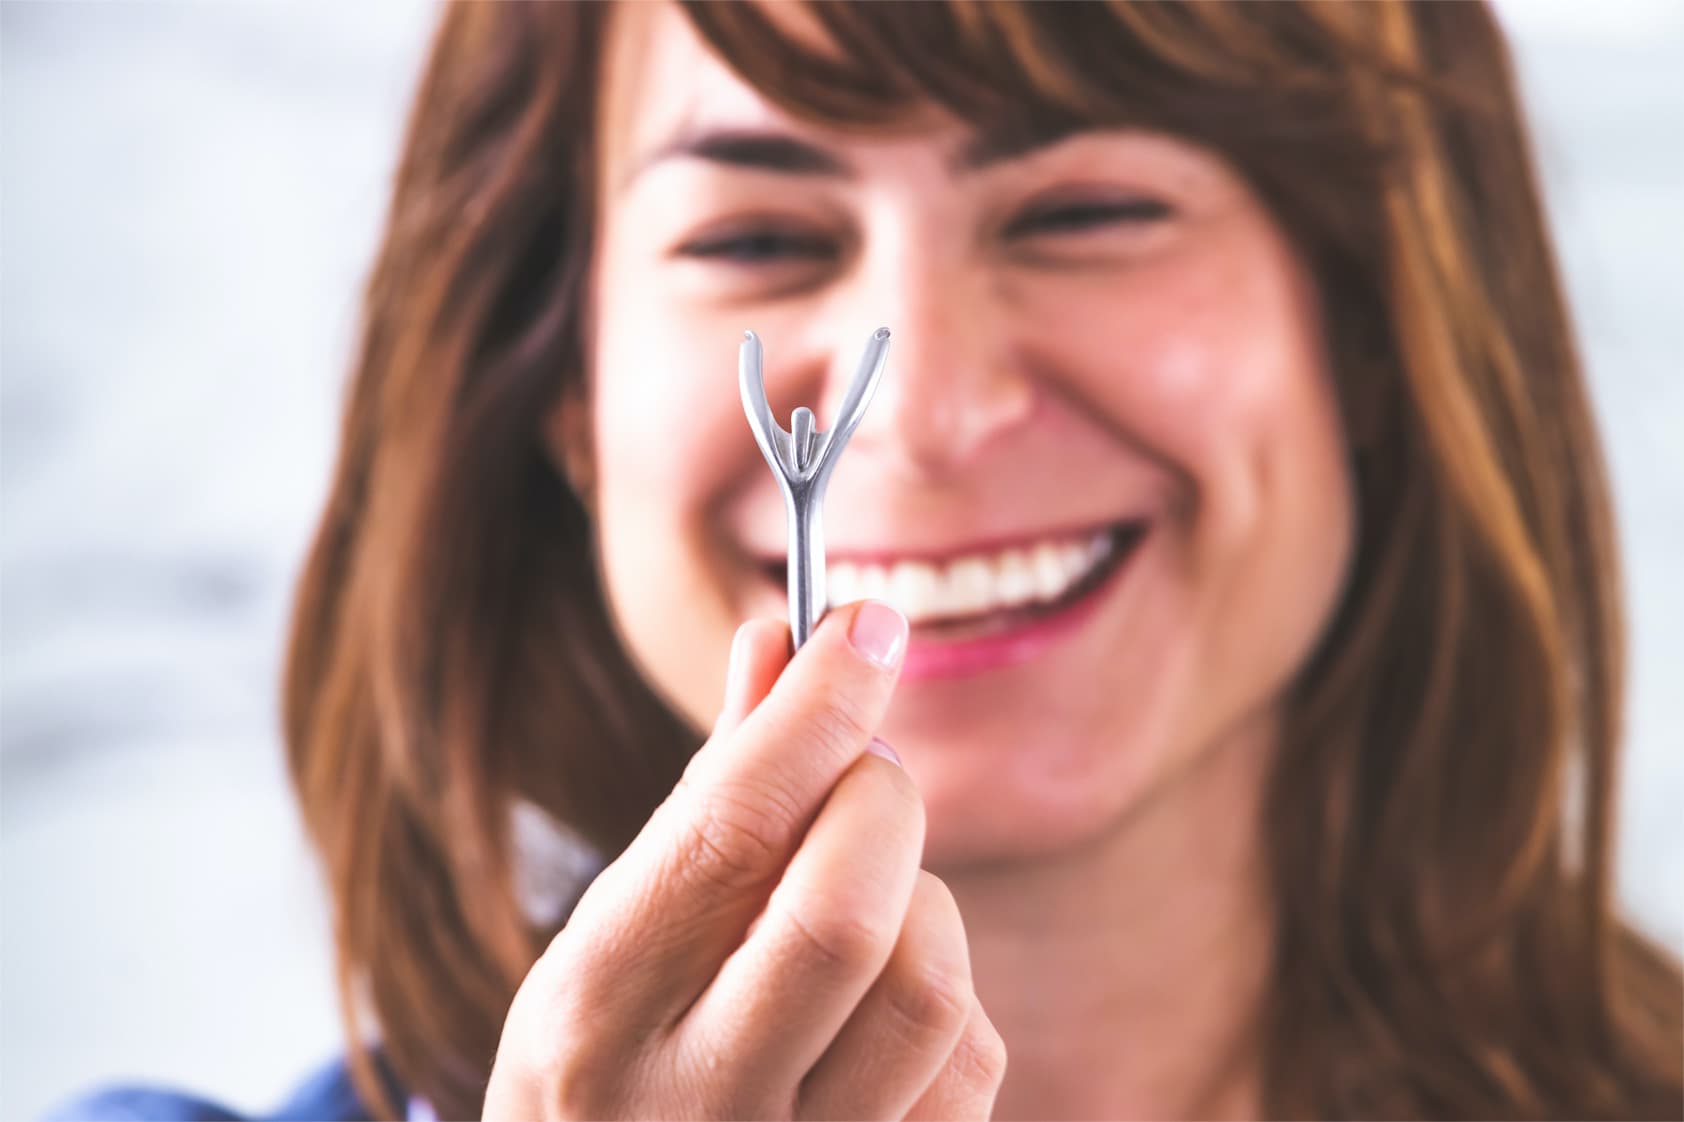 friendly floss, made to last a lifetime, launches to the dental profession